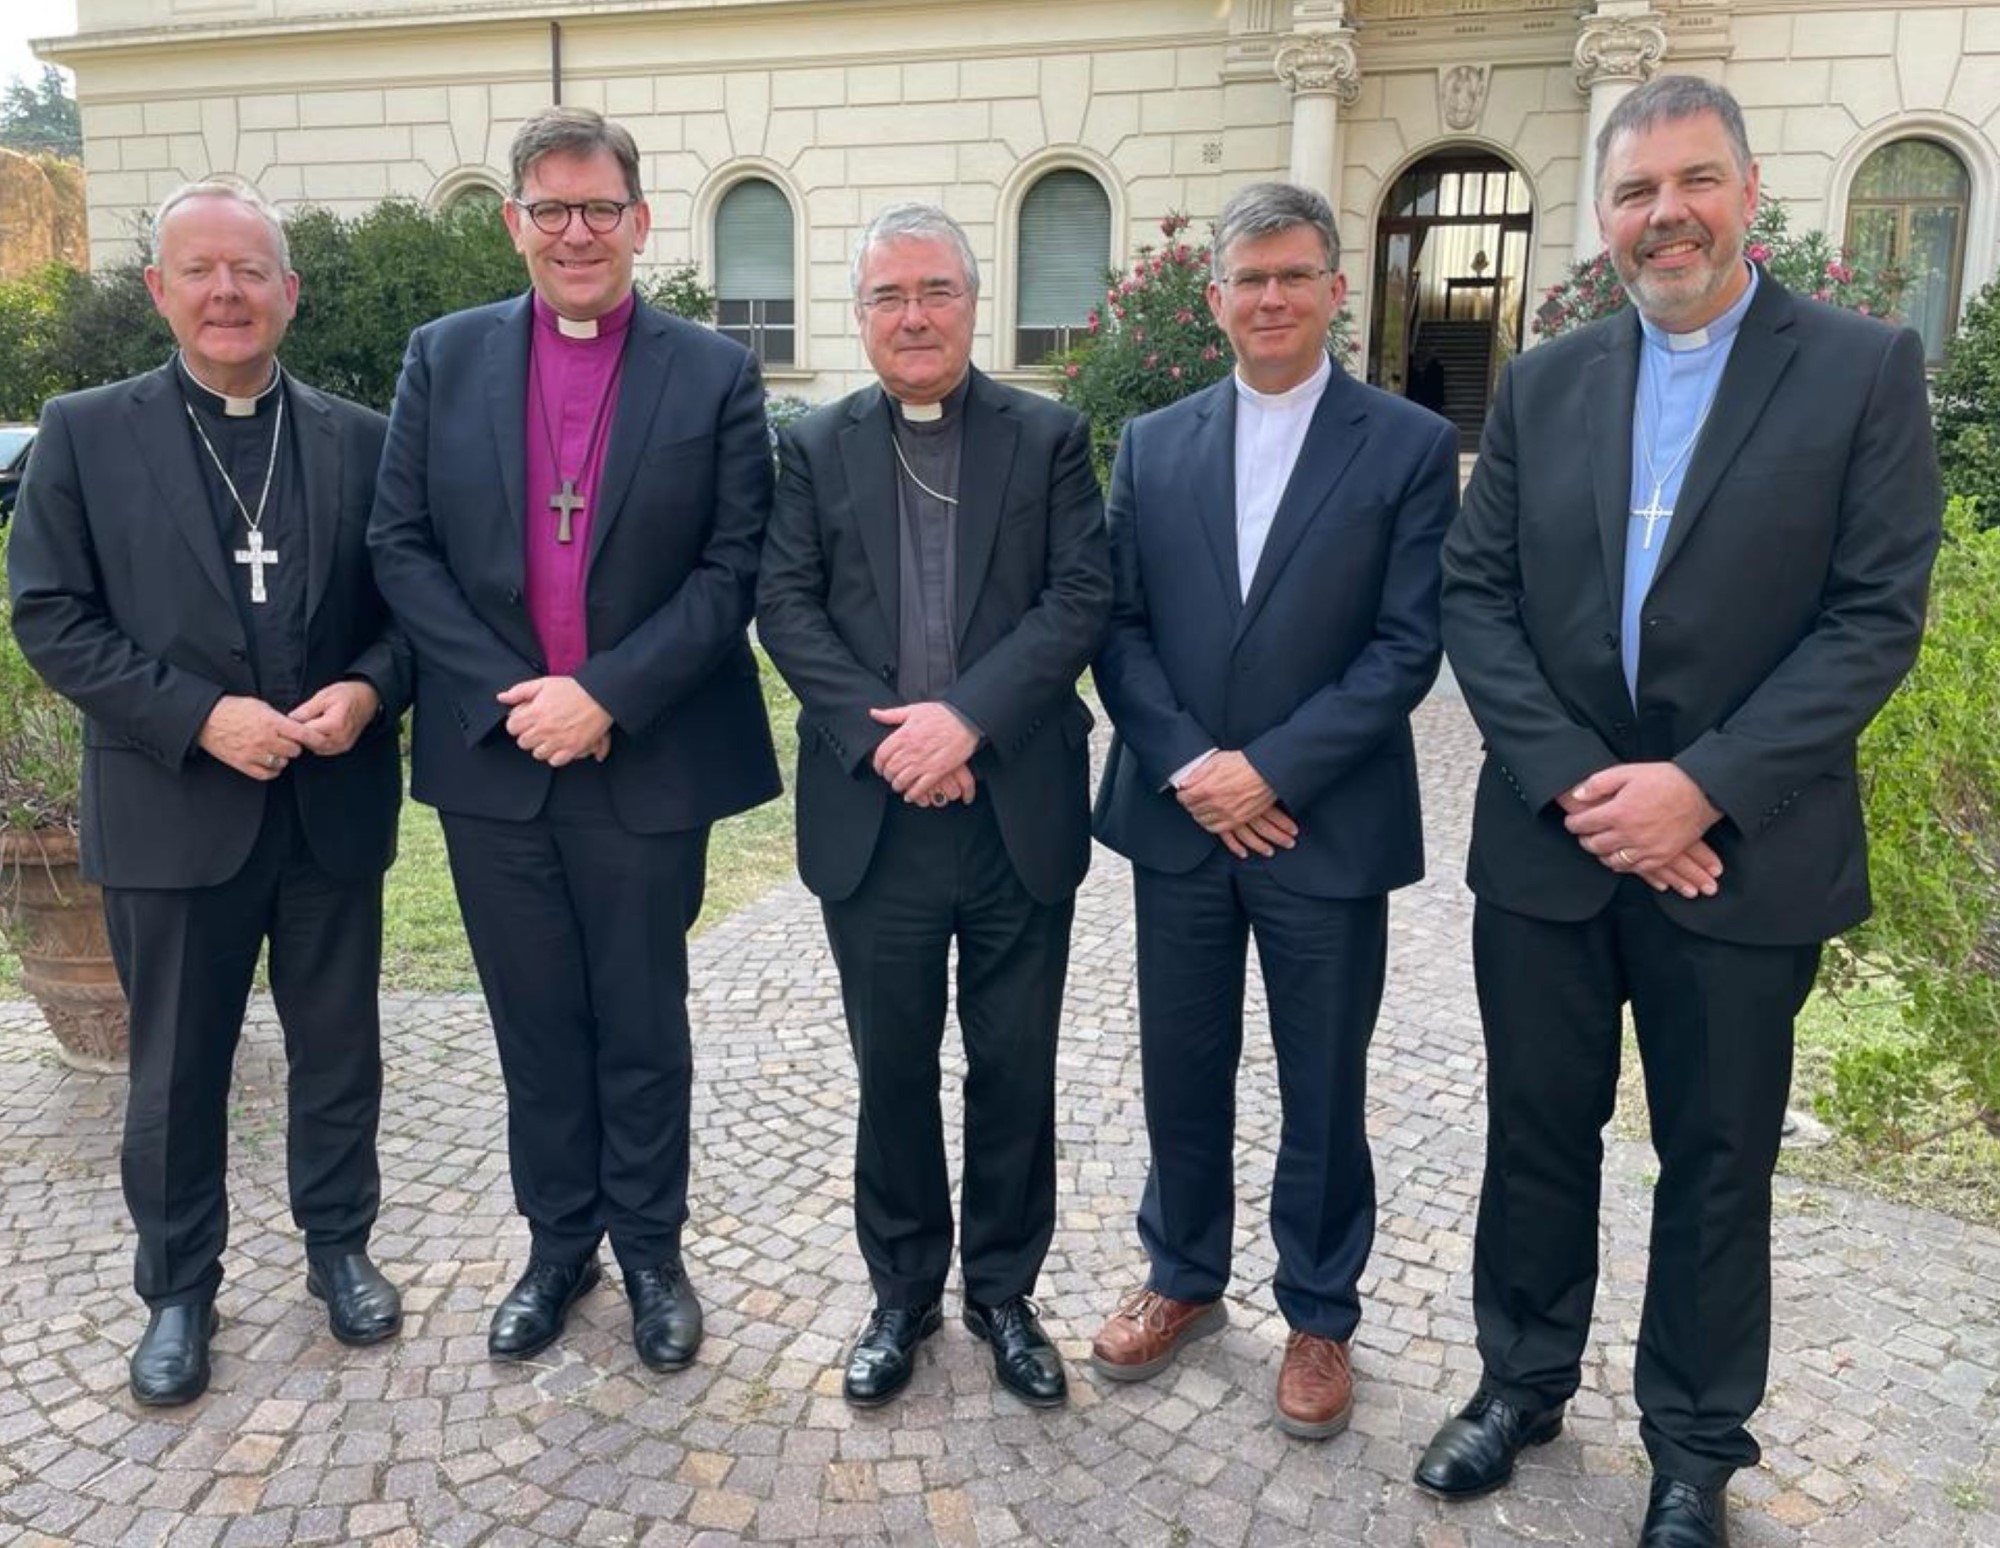 From left: Archbishop Eamon Martin, Bishop Andrew Forster, Archbishop John McDowell, Dr Sam Mawhinney (Moderator of the Presbyterian Church in Ireland), and the Revd David Turtle (President of the Methodist Church in Ireland).